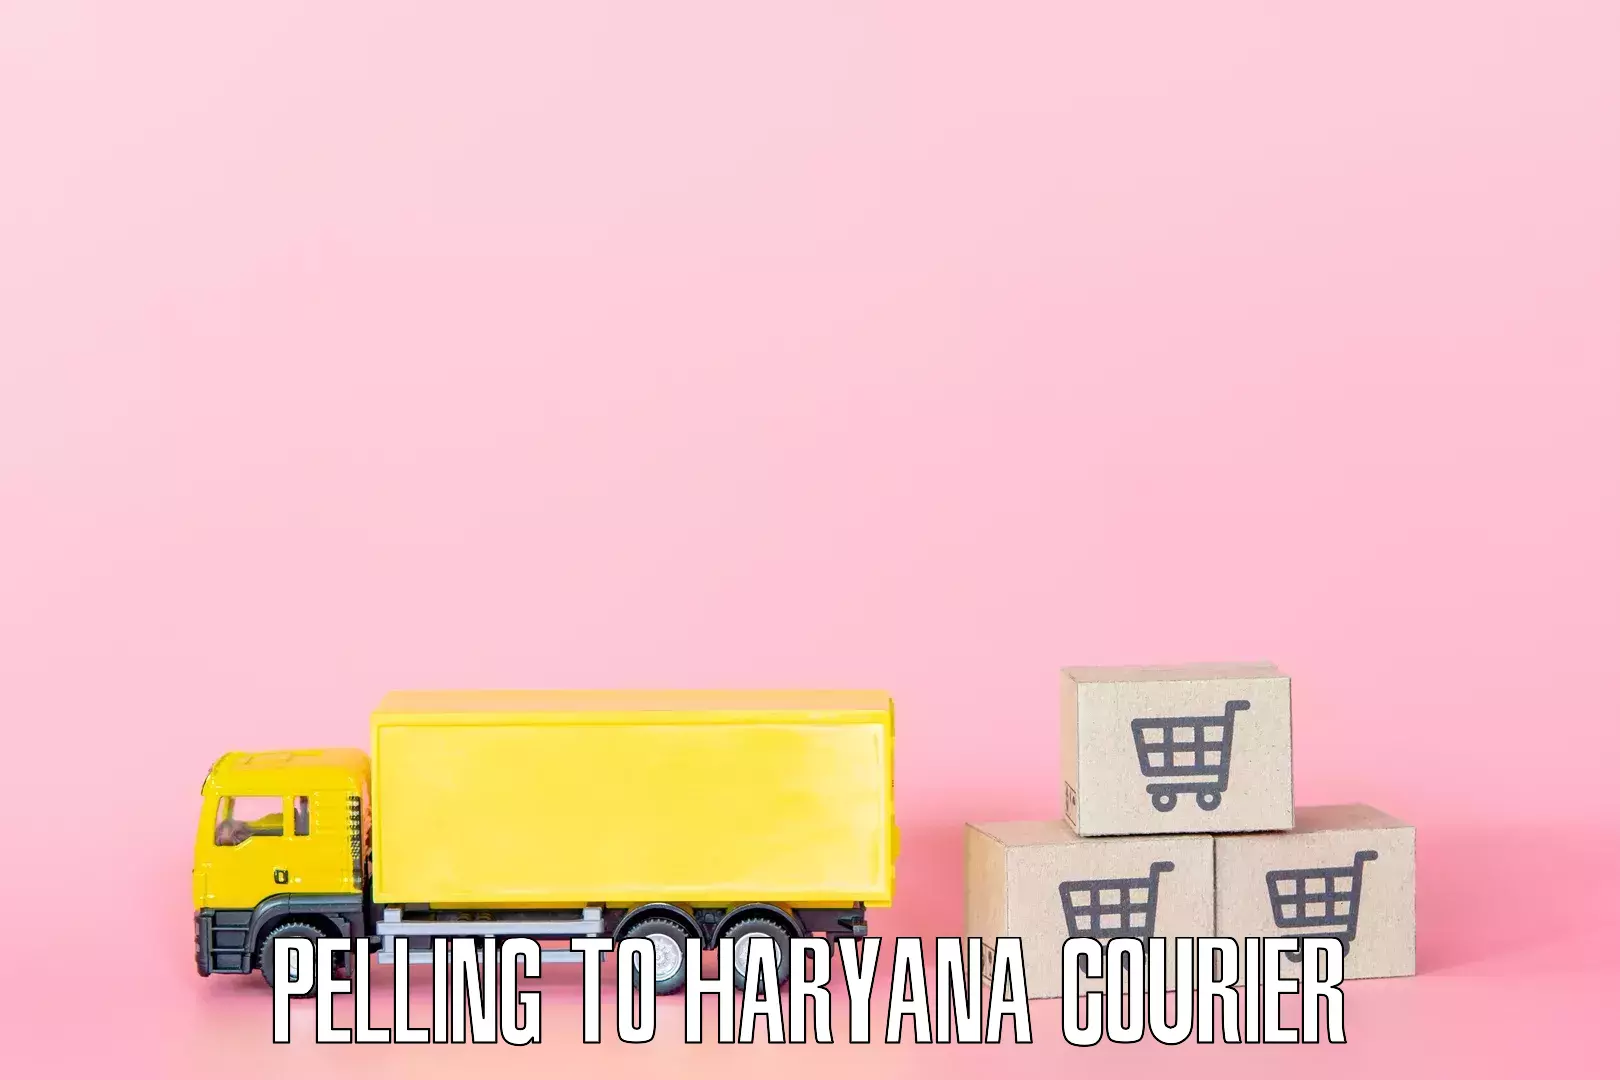 Household transport experts Pelling to Haryana